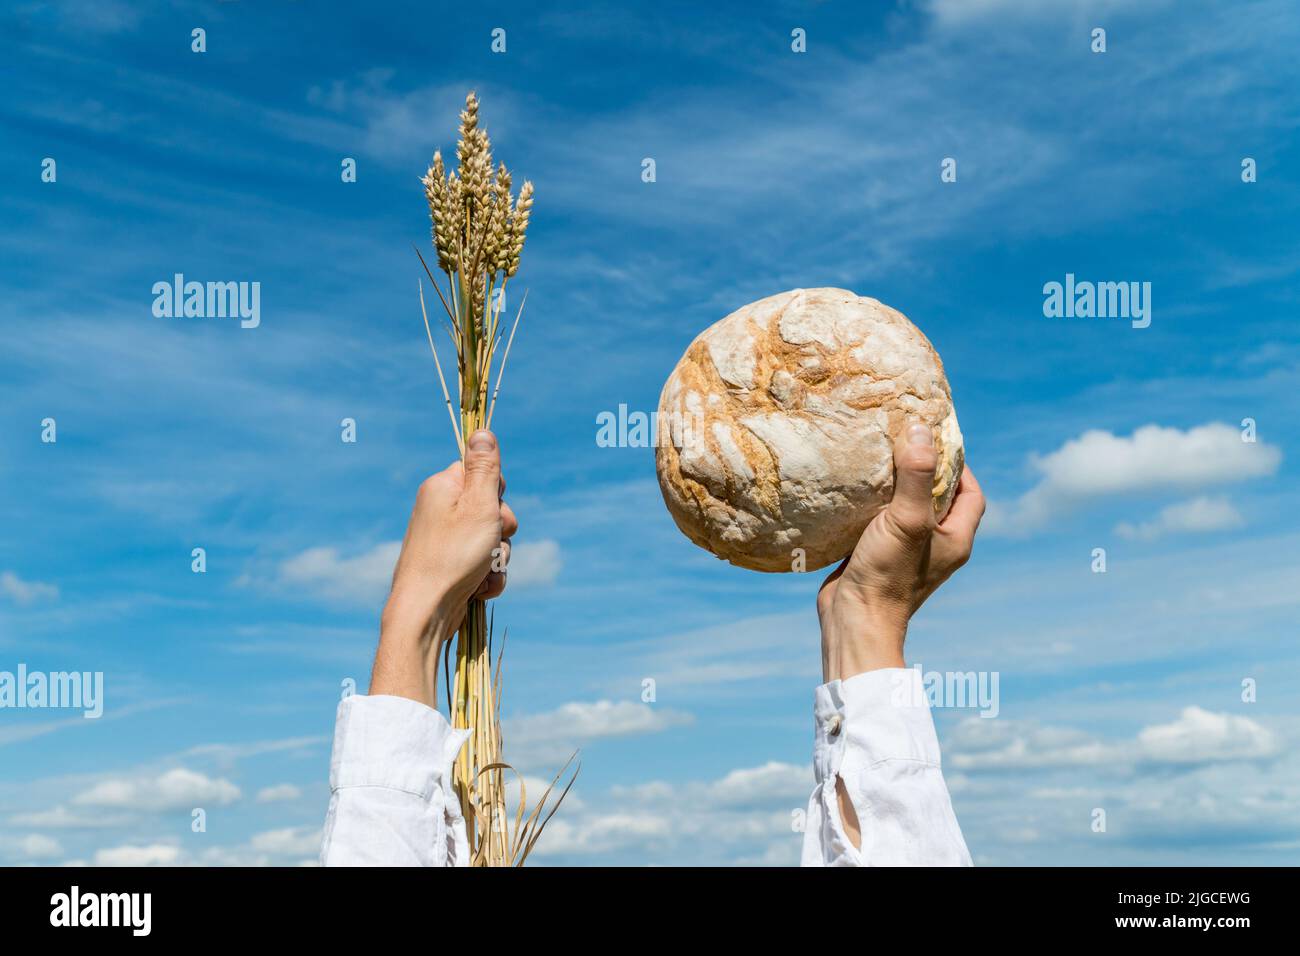 Male hands holding home baked bread loaf and wheat ears  above his head over a blue summer sky. Food production concept Stock Photo